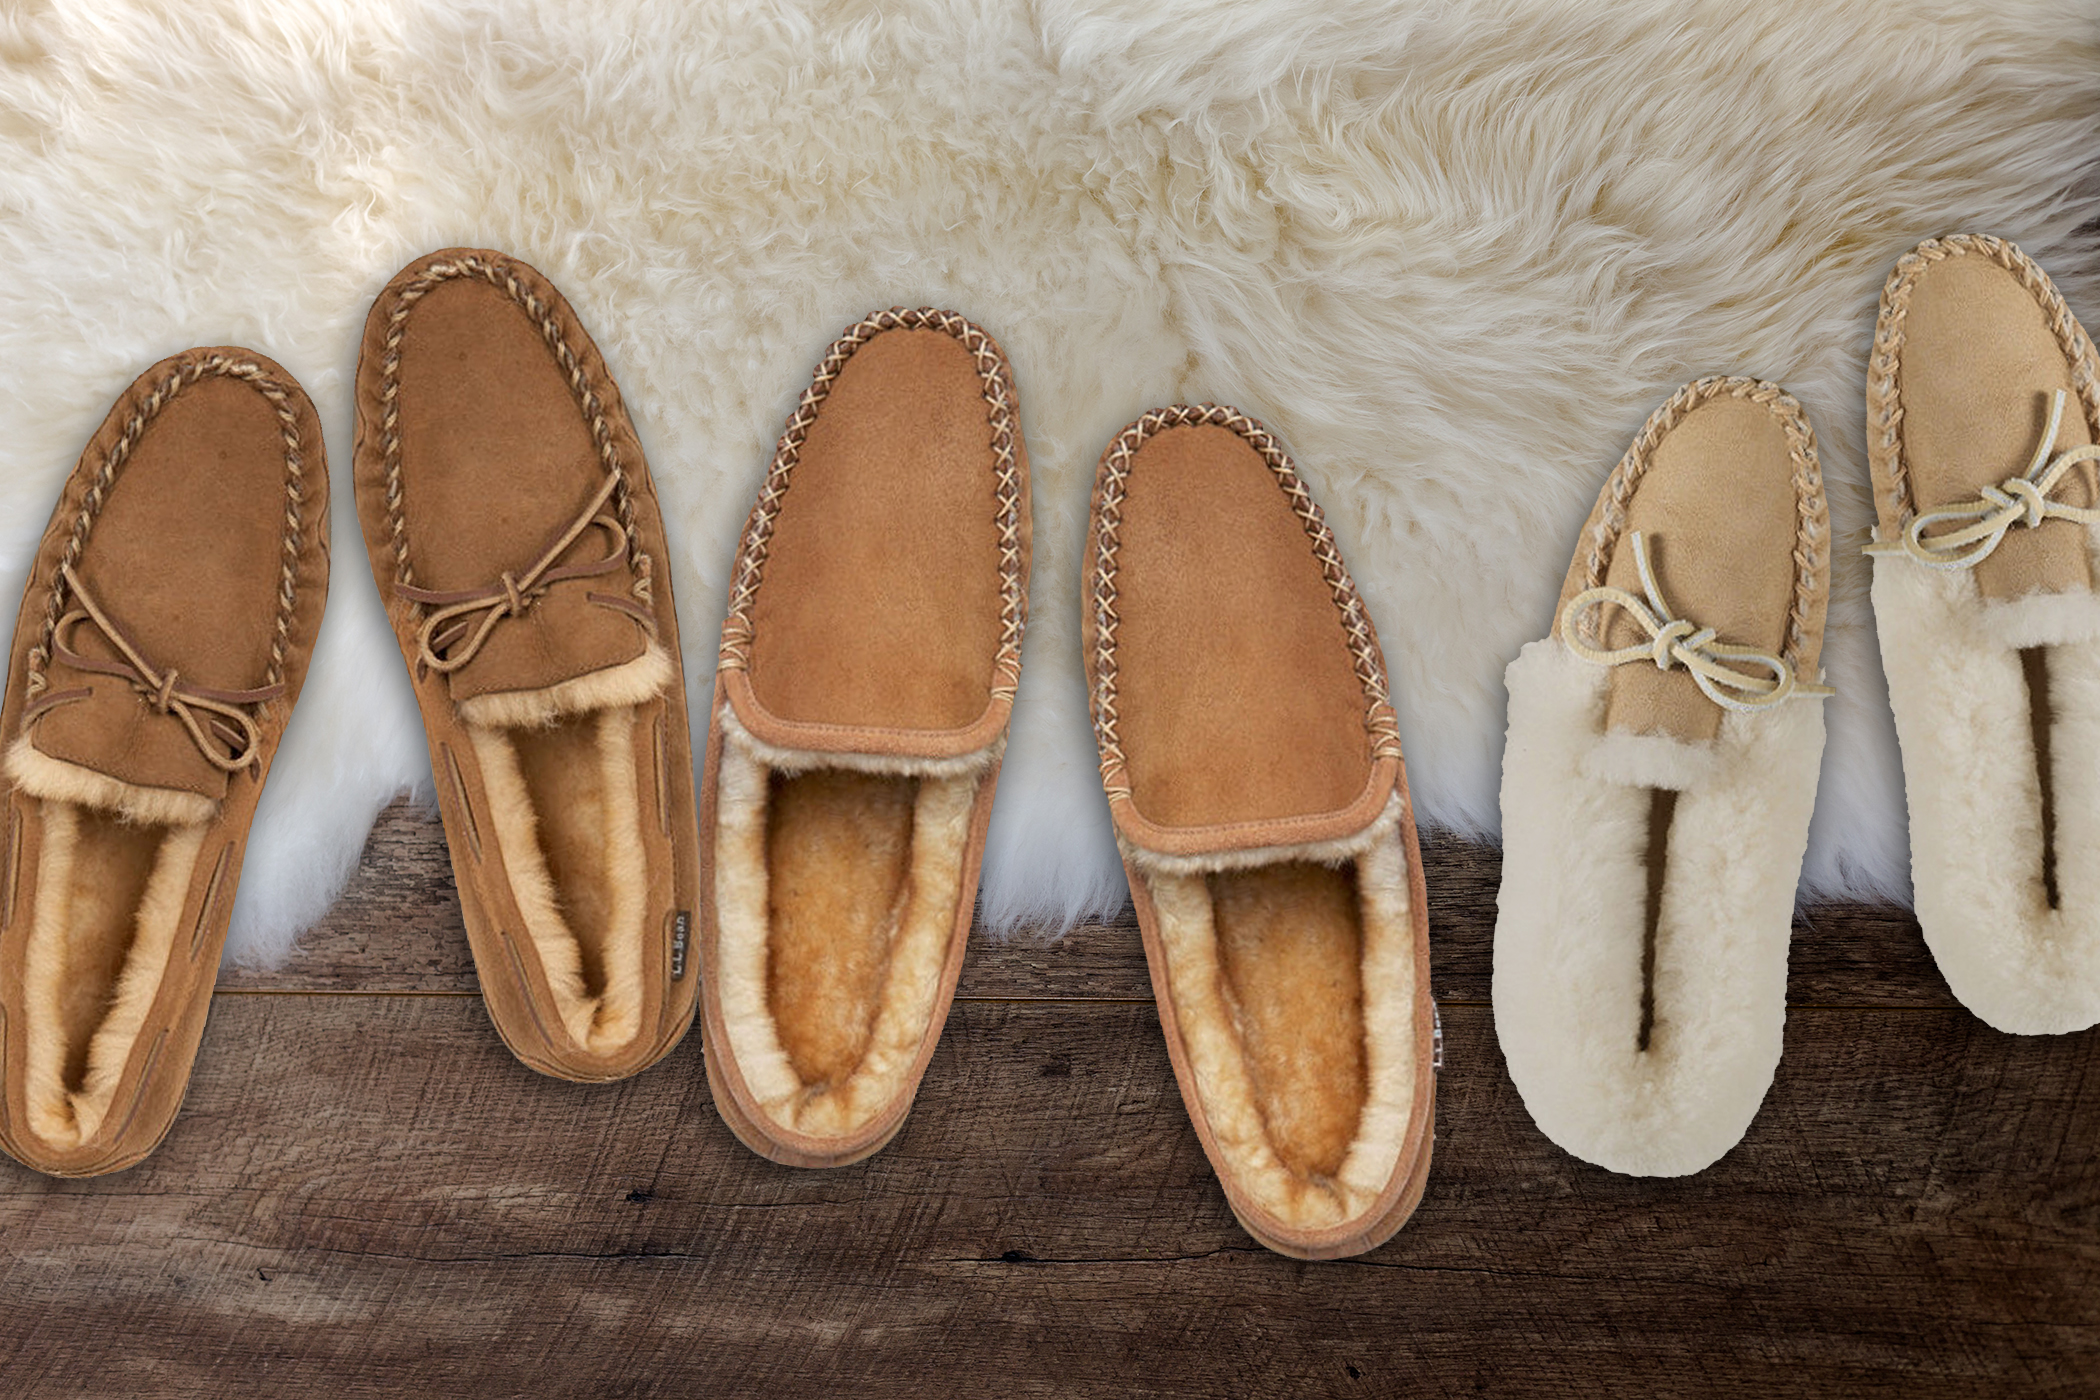 Best Slippers: For Women, for Men, and 